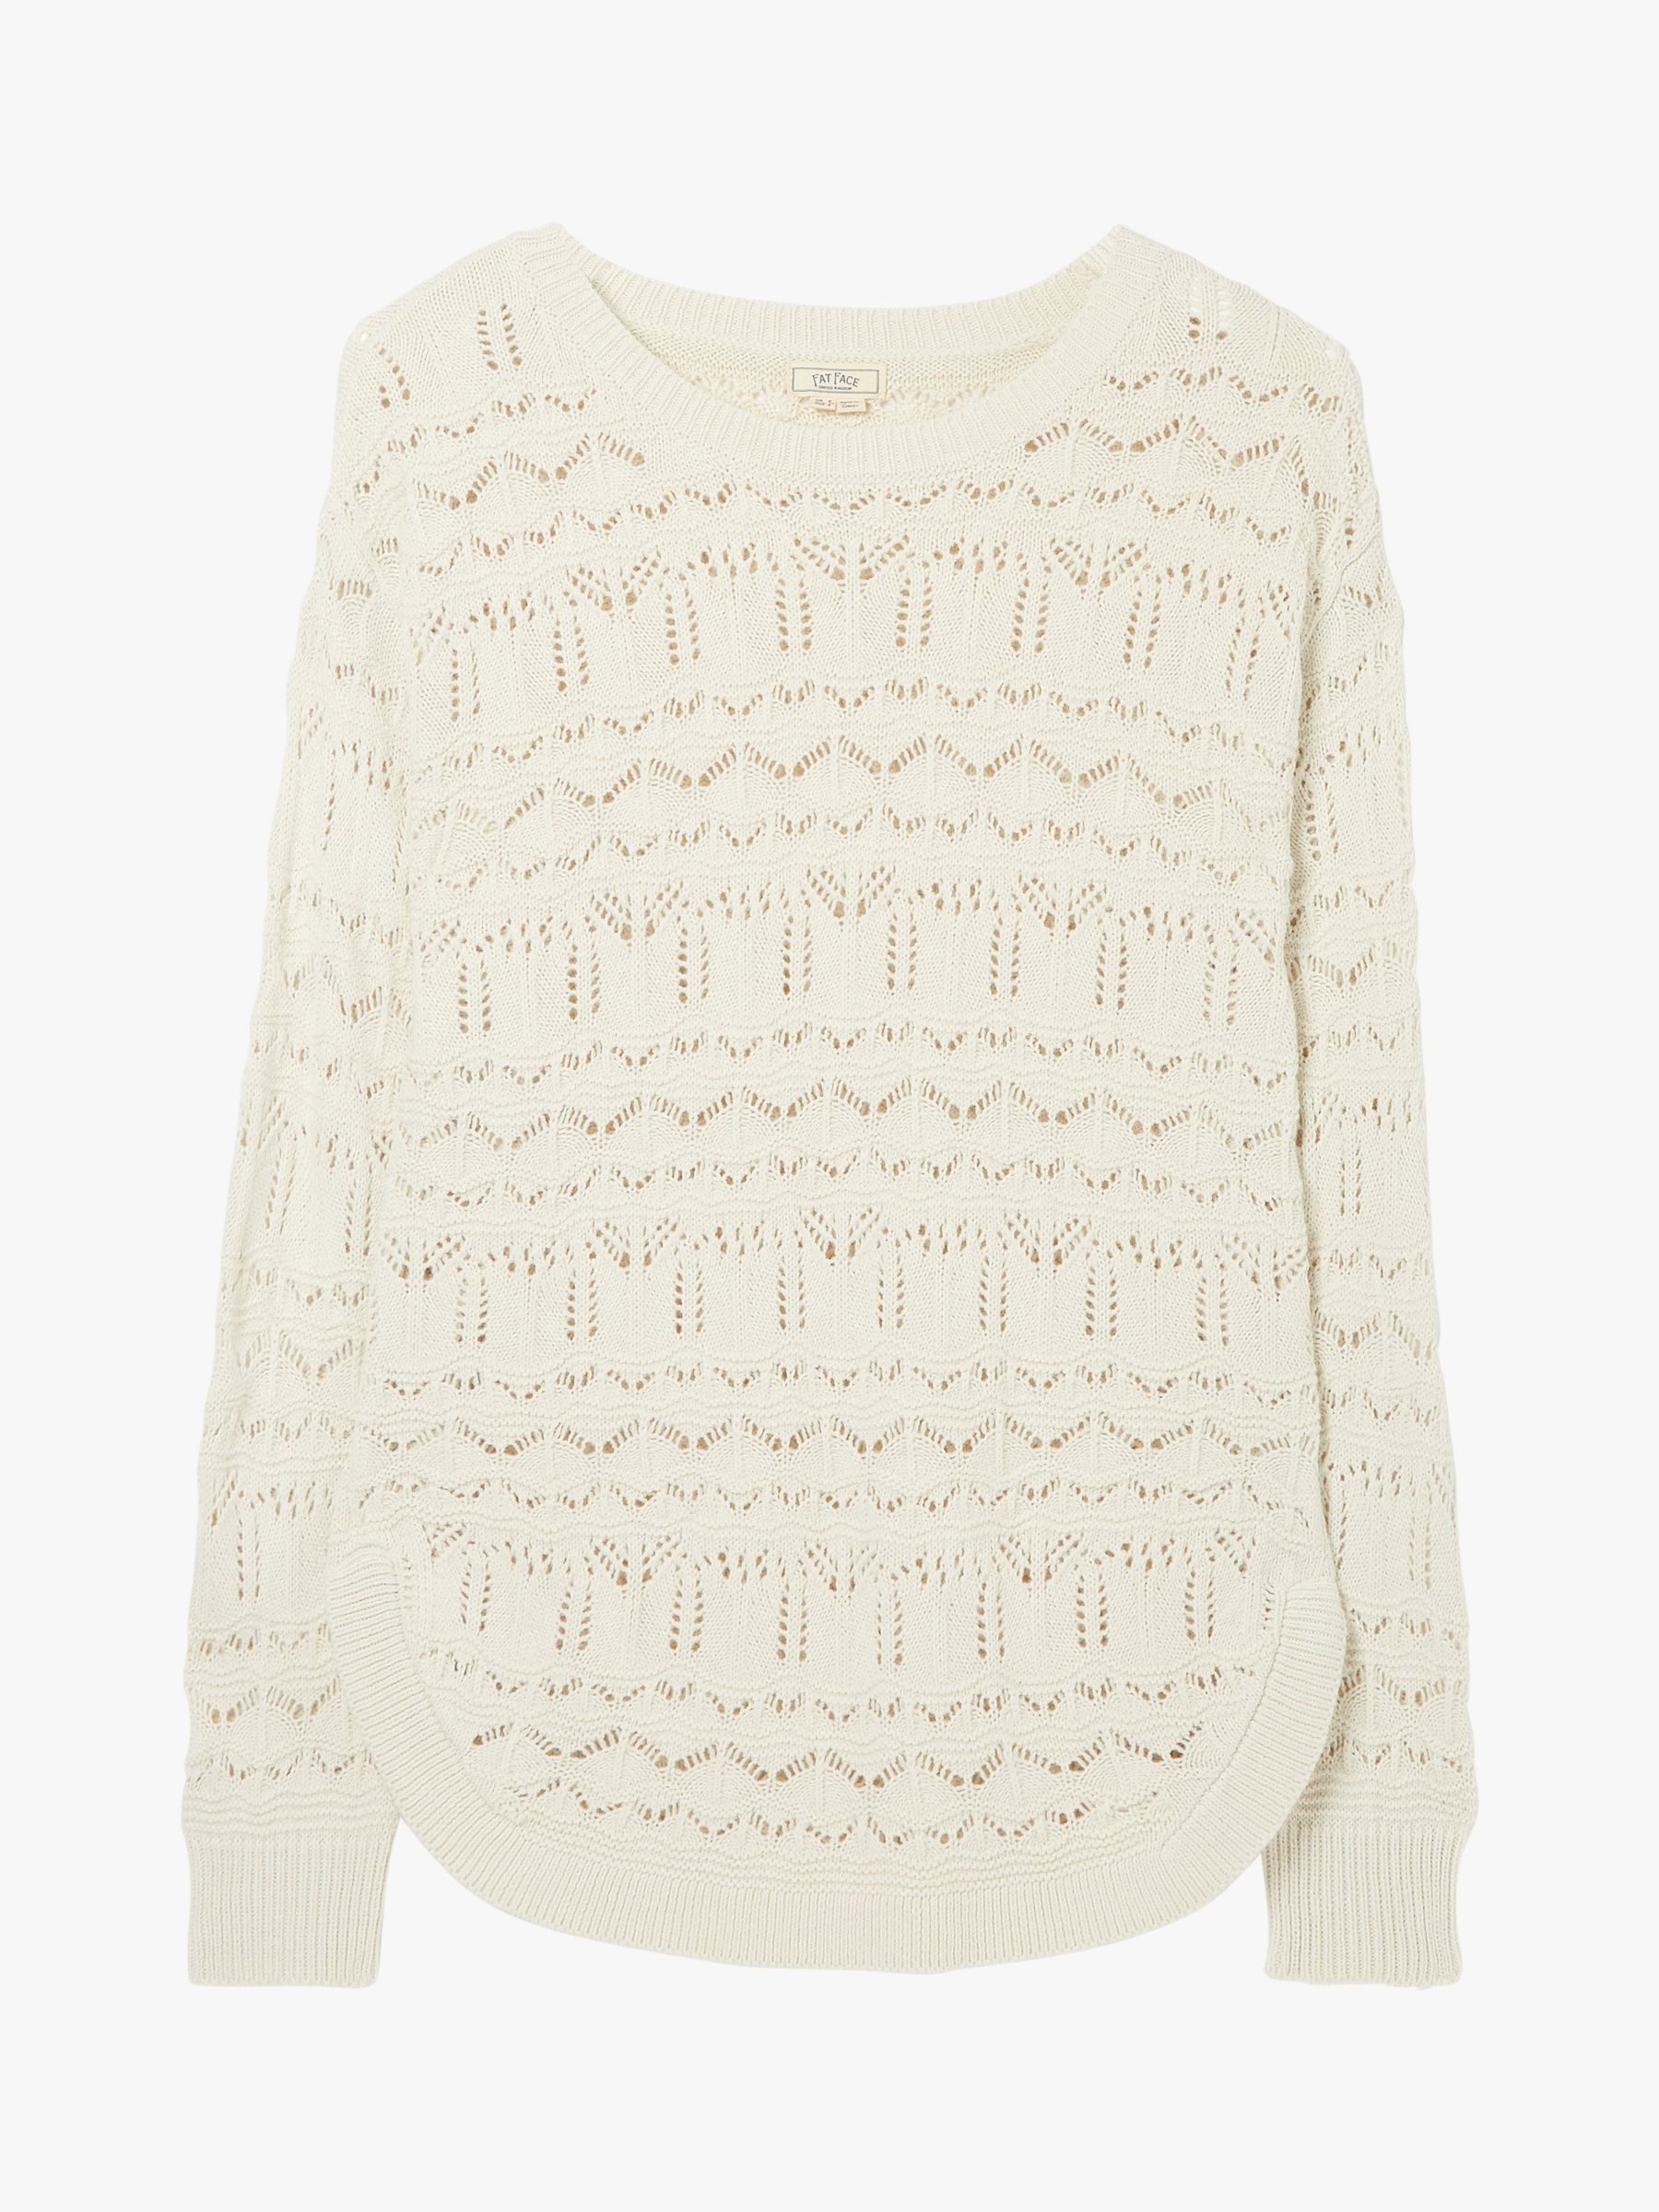 FatFace Emmy Broderie Jumper, Ivory, 6